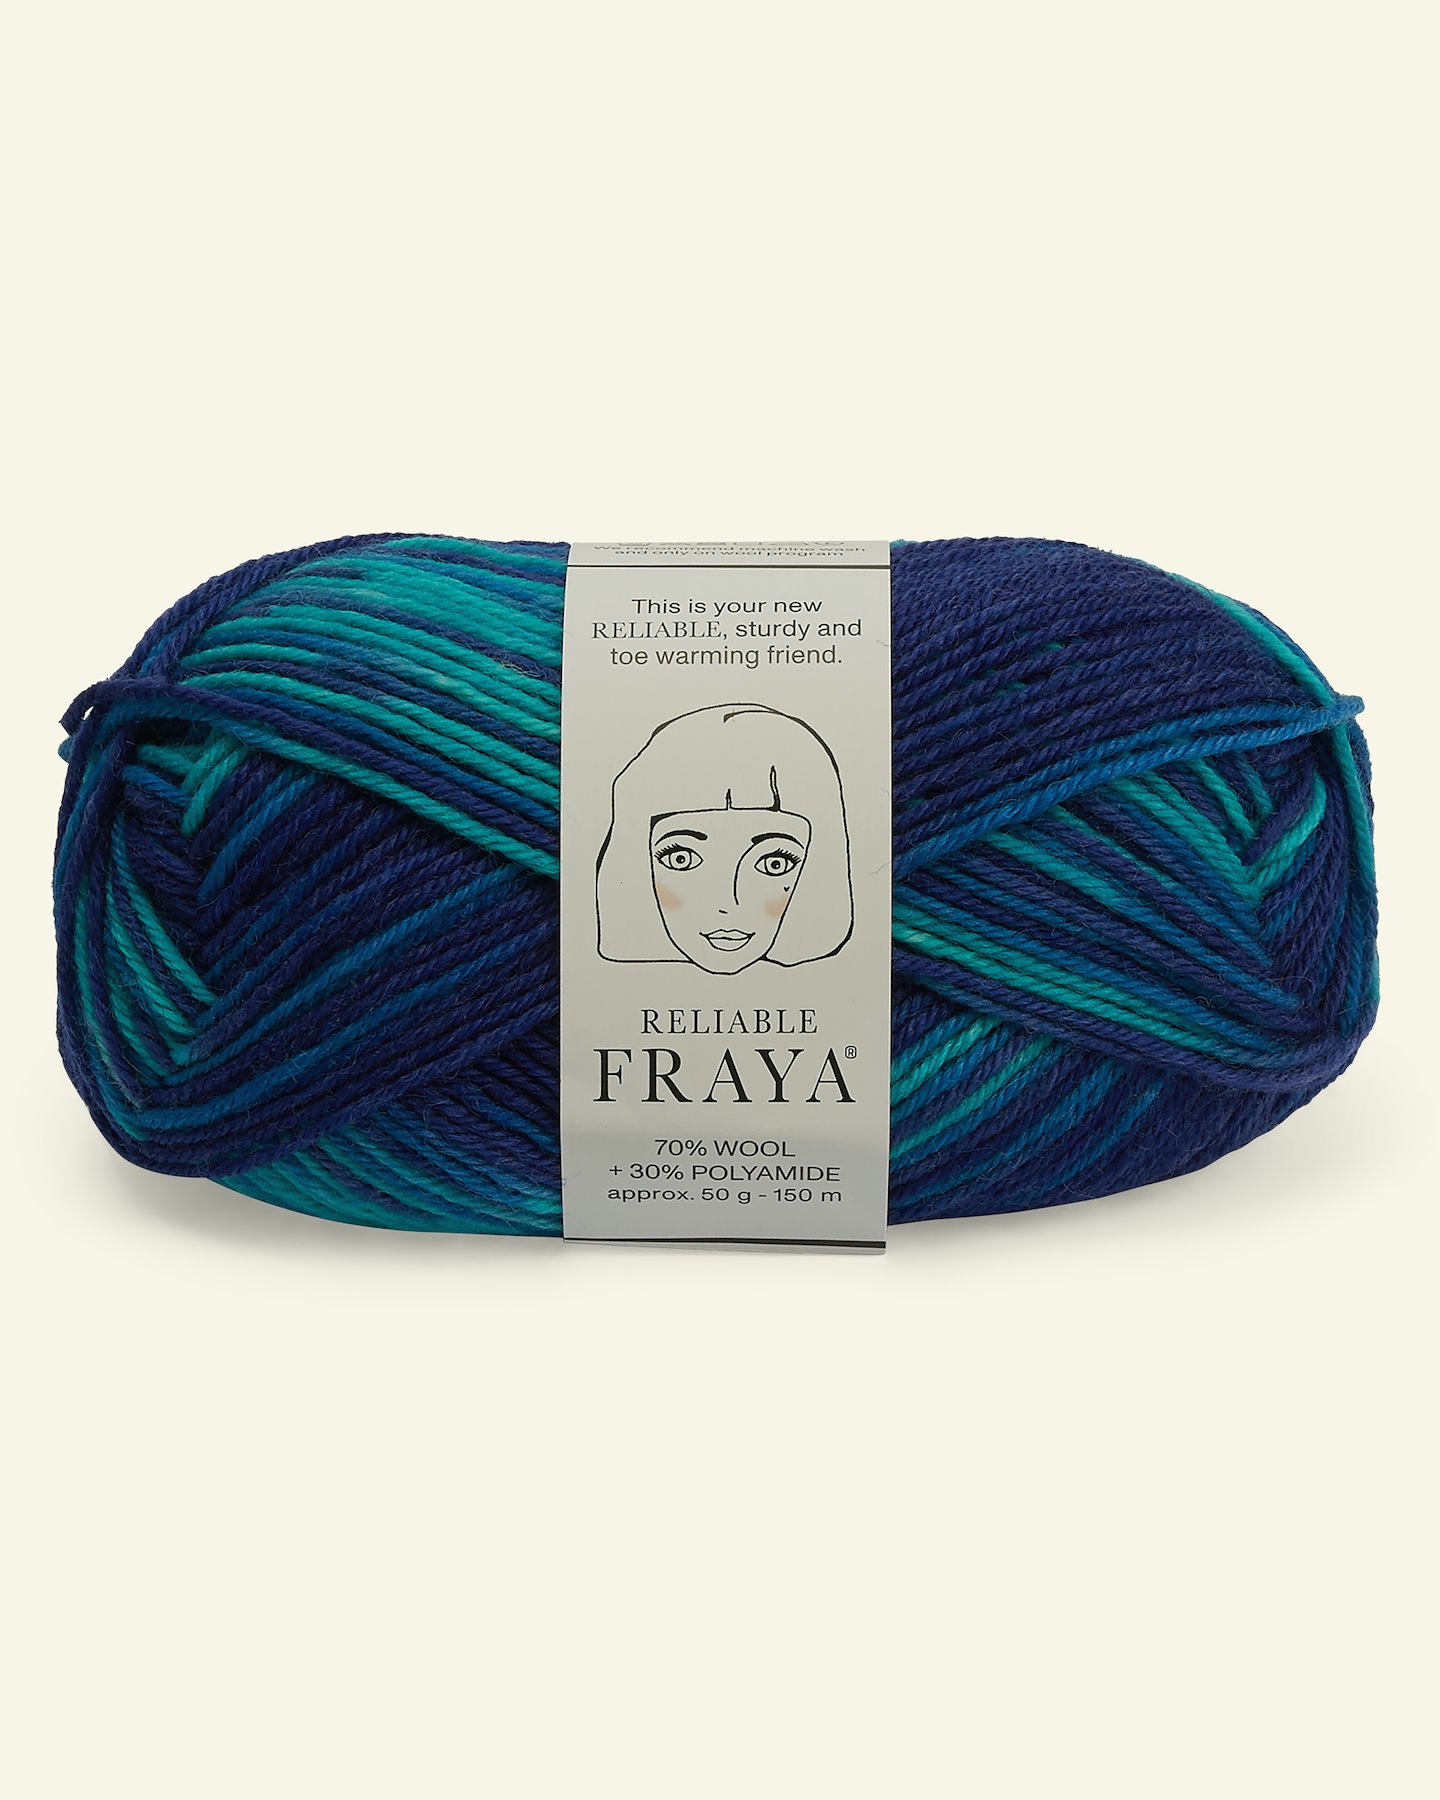 FRAYA, Wolle "Reliable", blau türkis mix 90001196_pack